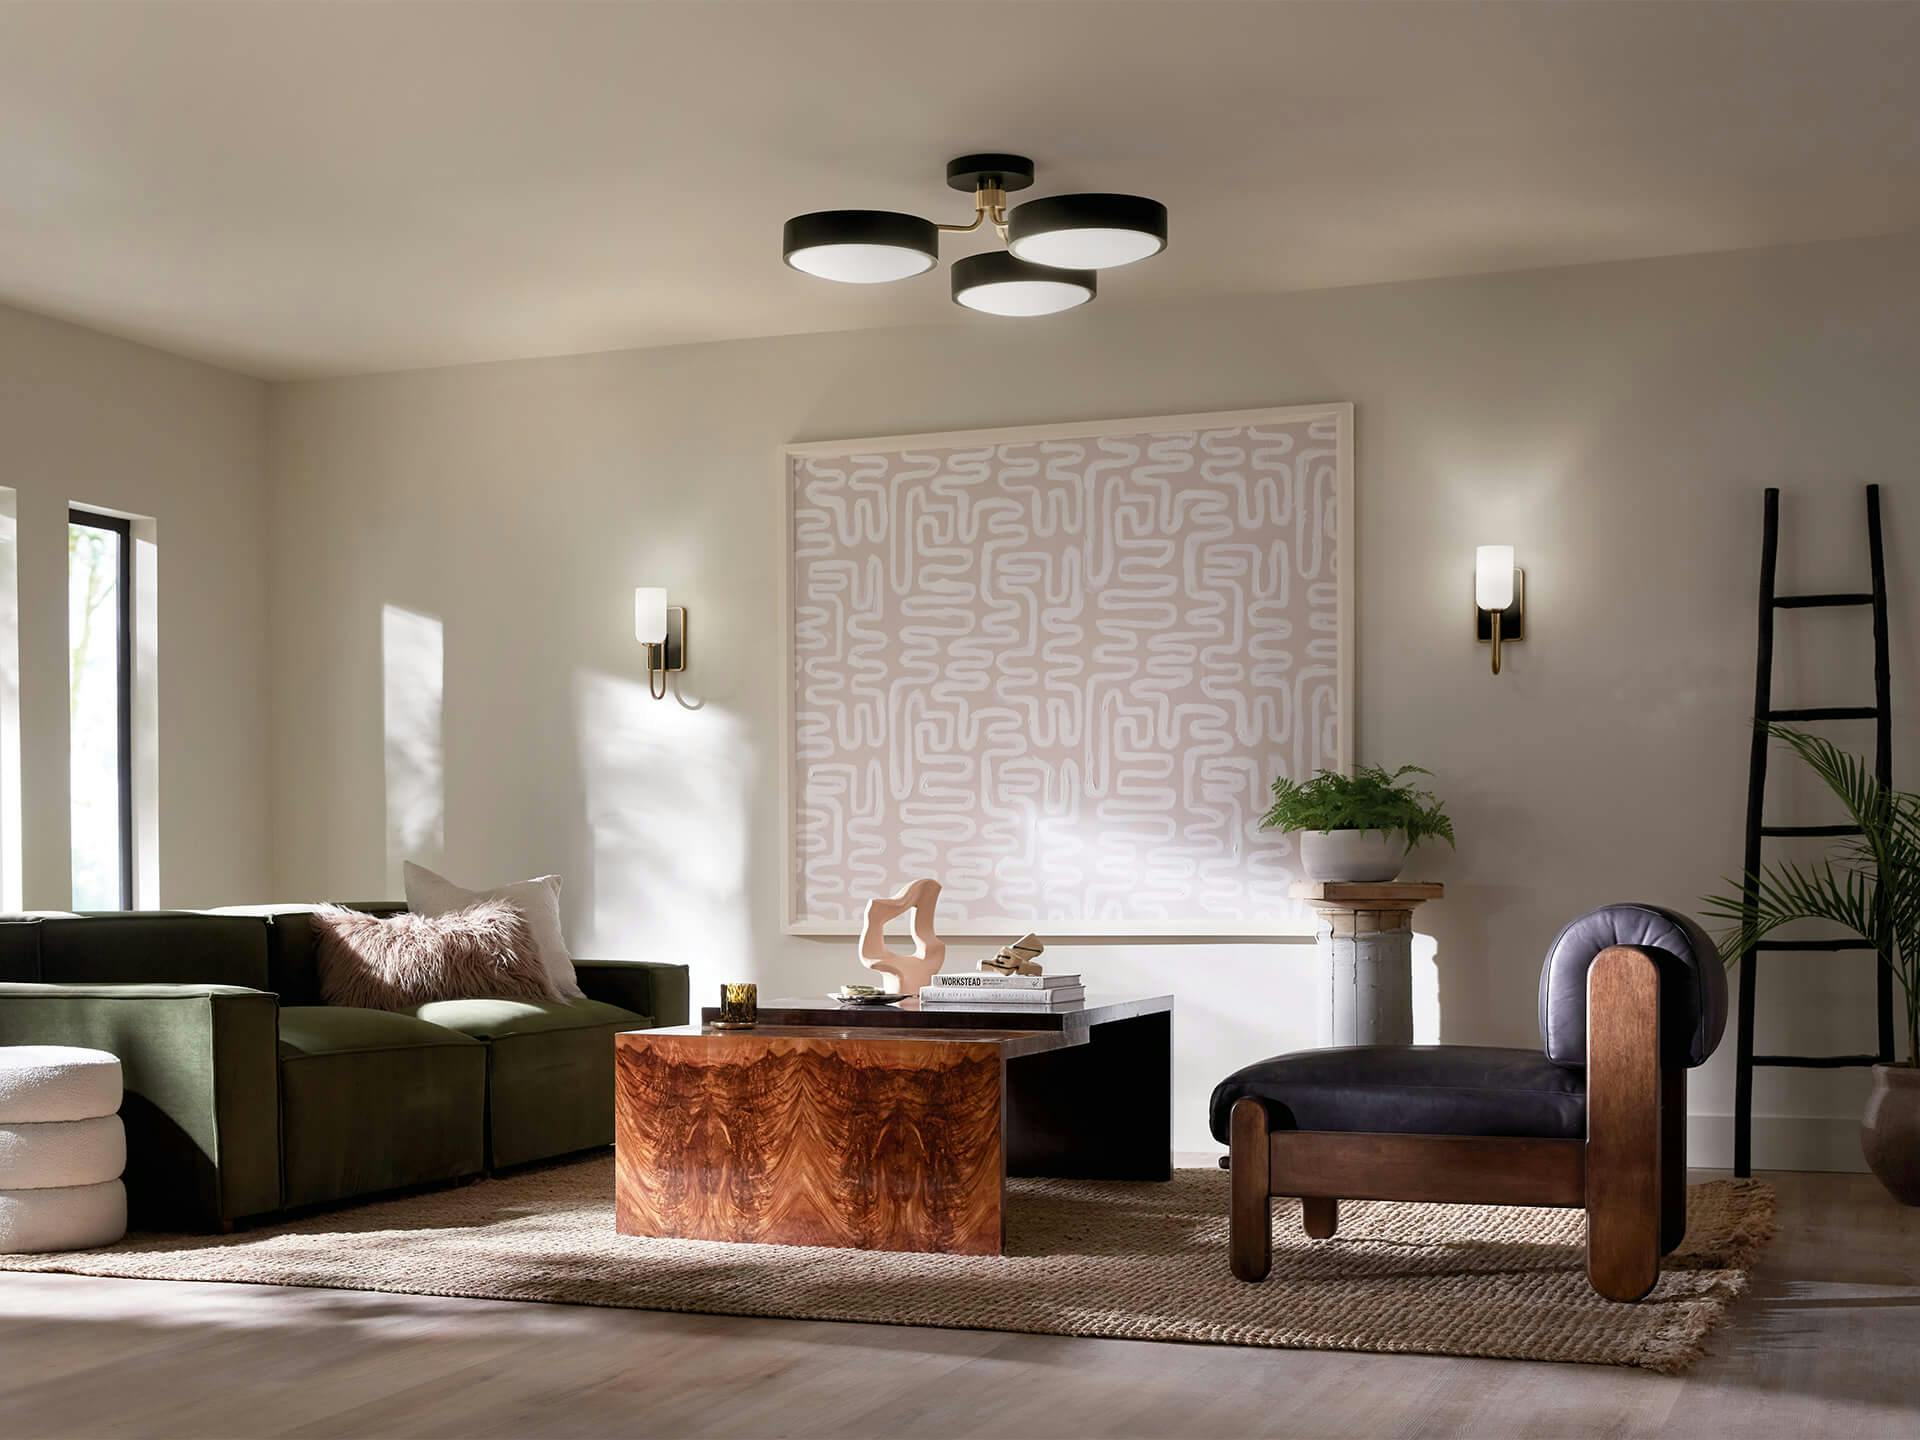 Living room with Sago ceiling light in daytime